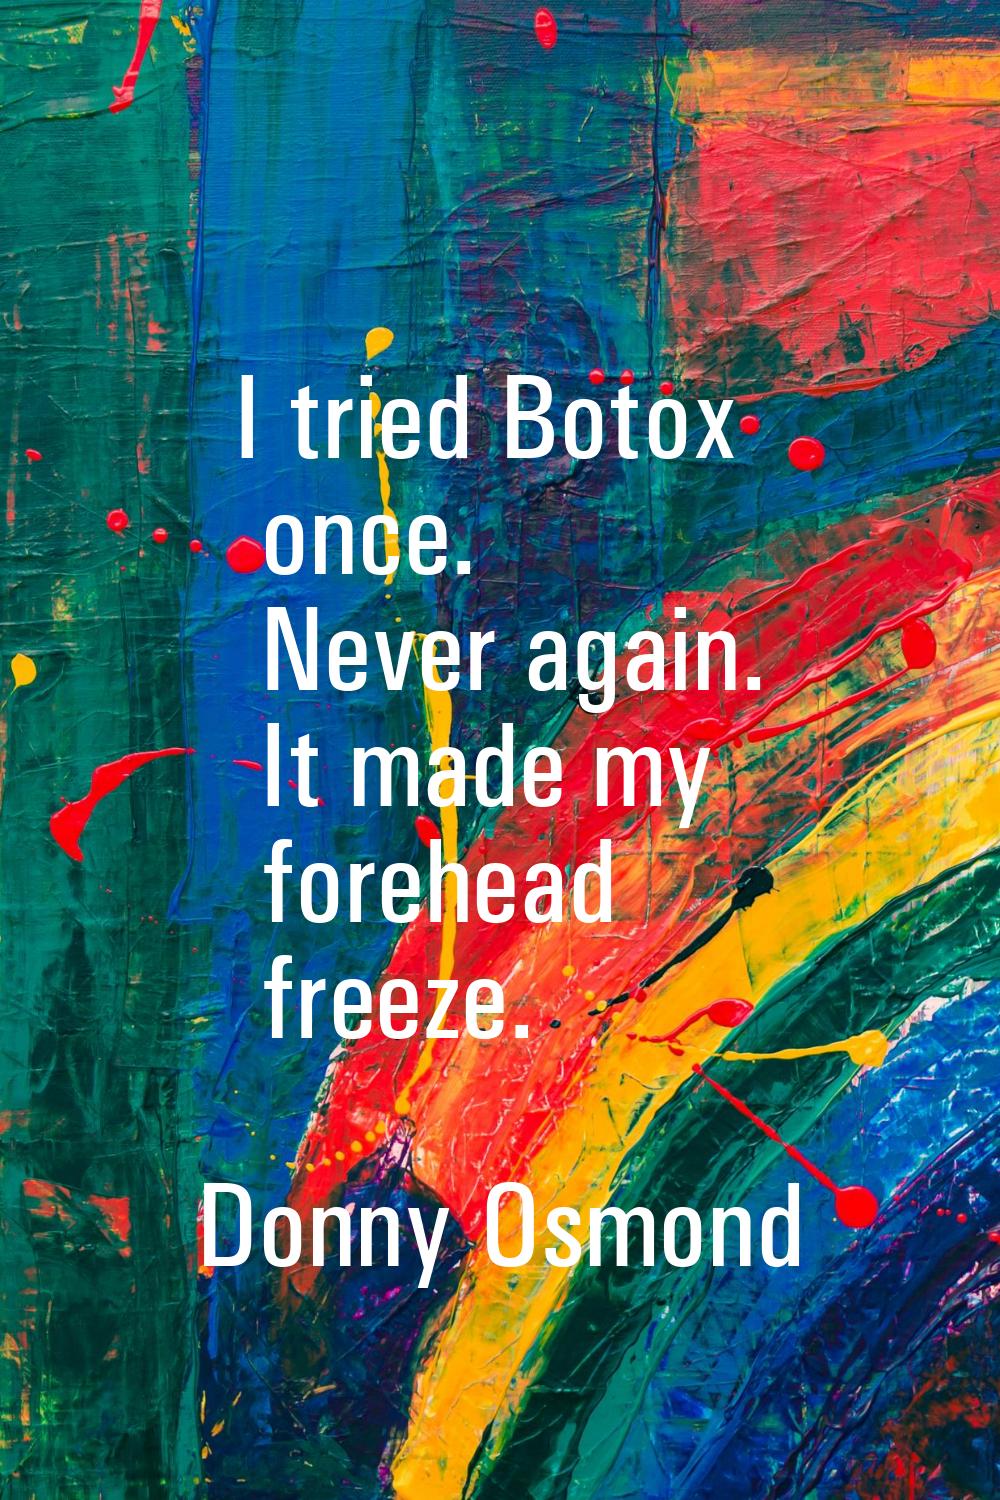 I tried Botox once. Never again. It made my forehead freeze.